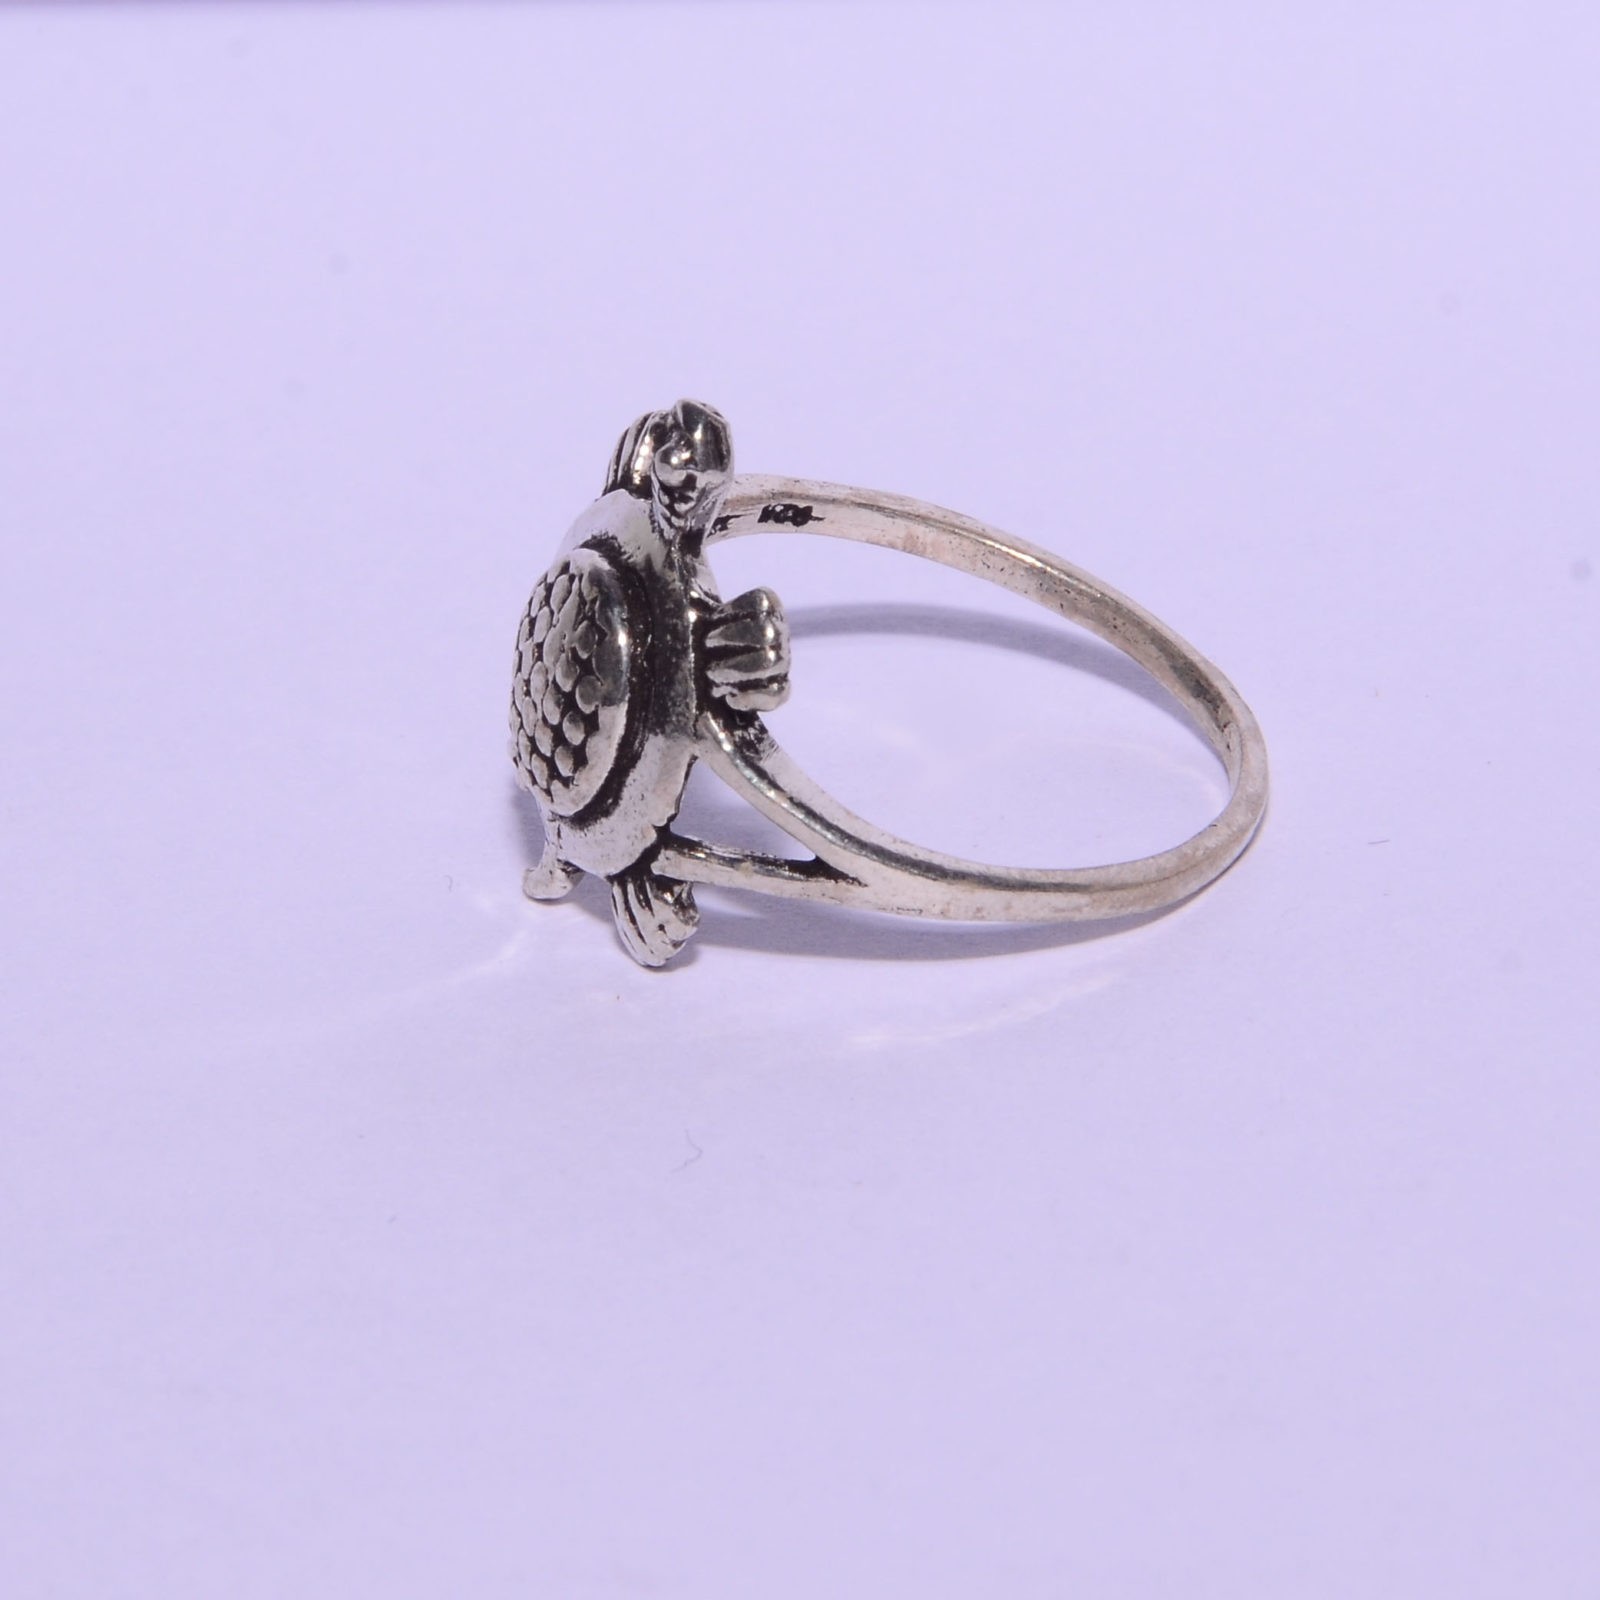 Turtle or Tortoise Ring, With or Without Gemstone - Etsy